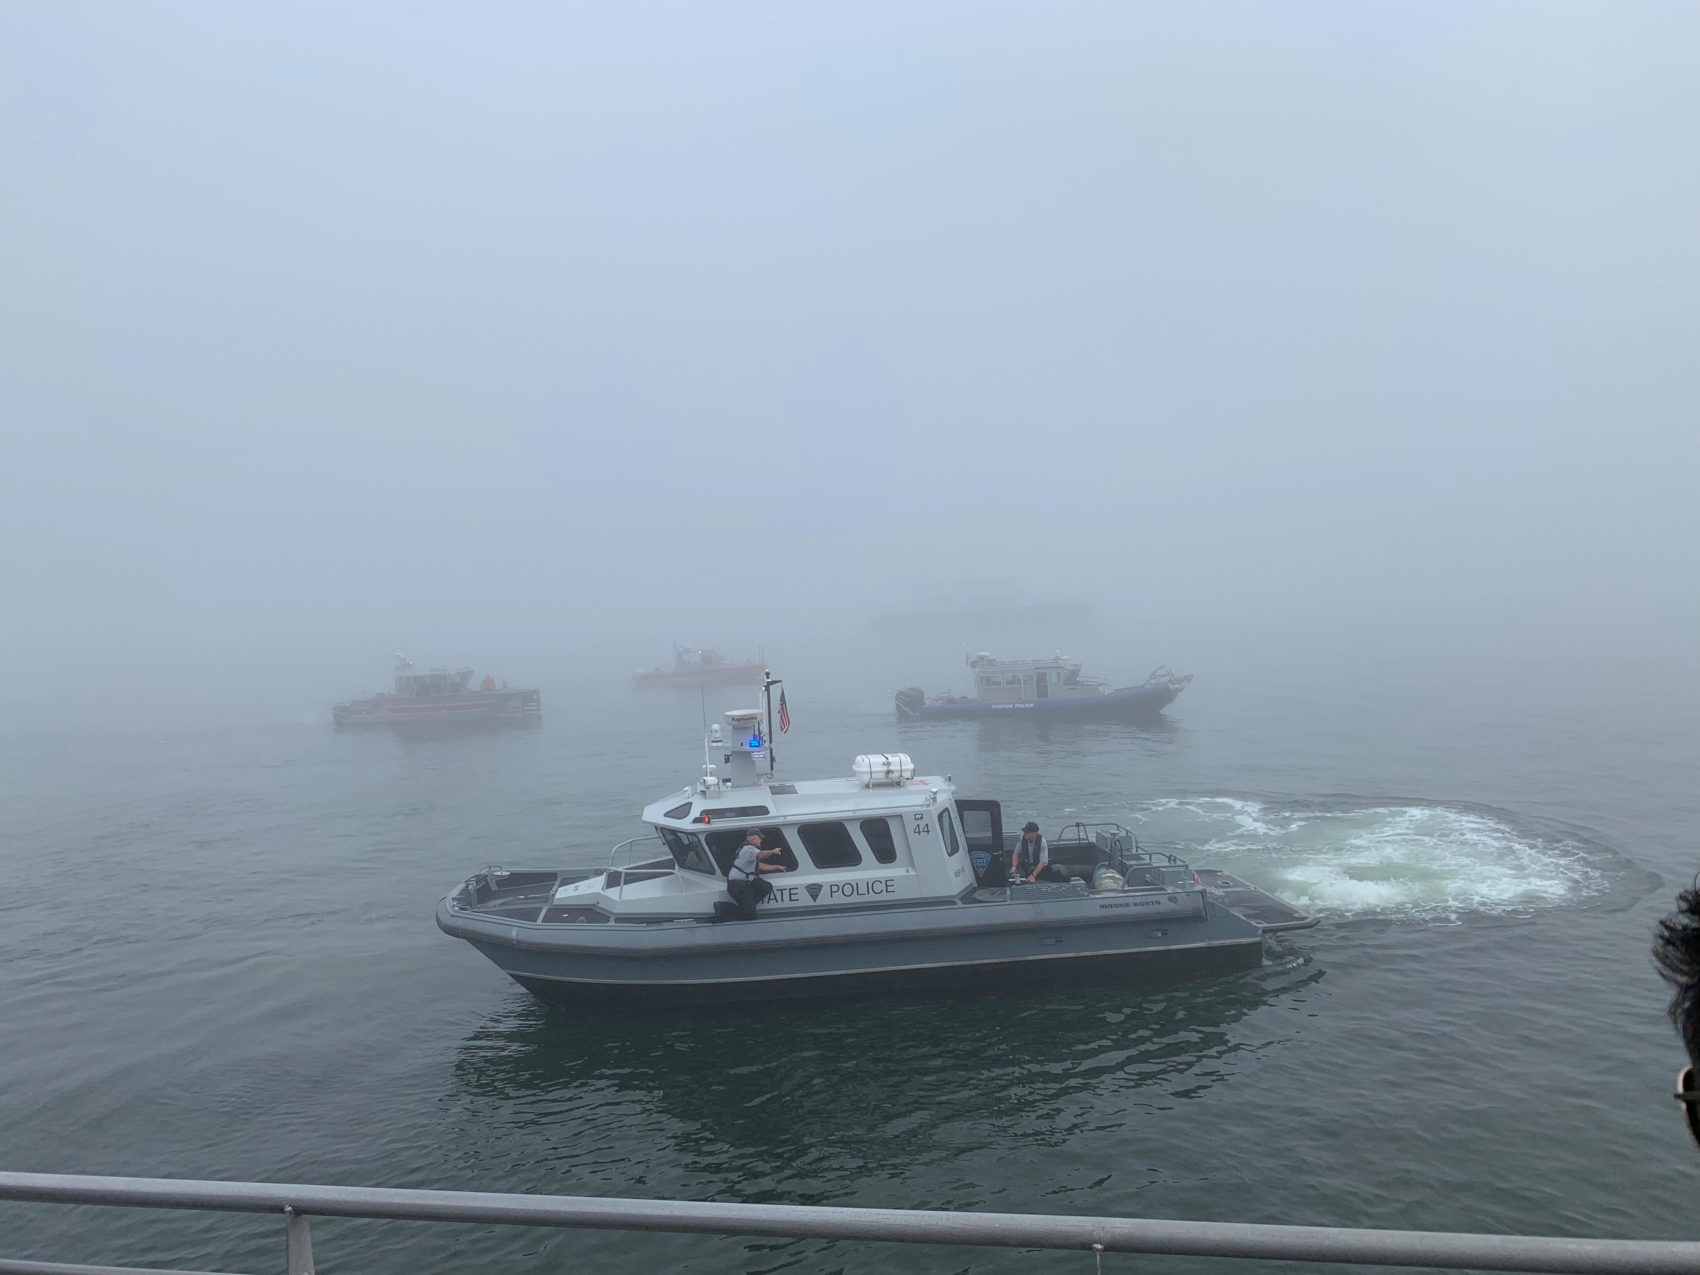 A Massachusetts State Police boat at the scene of a ferry going aground on Friday morning in Boston Harbor. (Photo courtesy Craig Snyder)